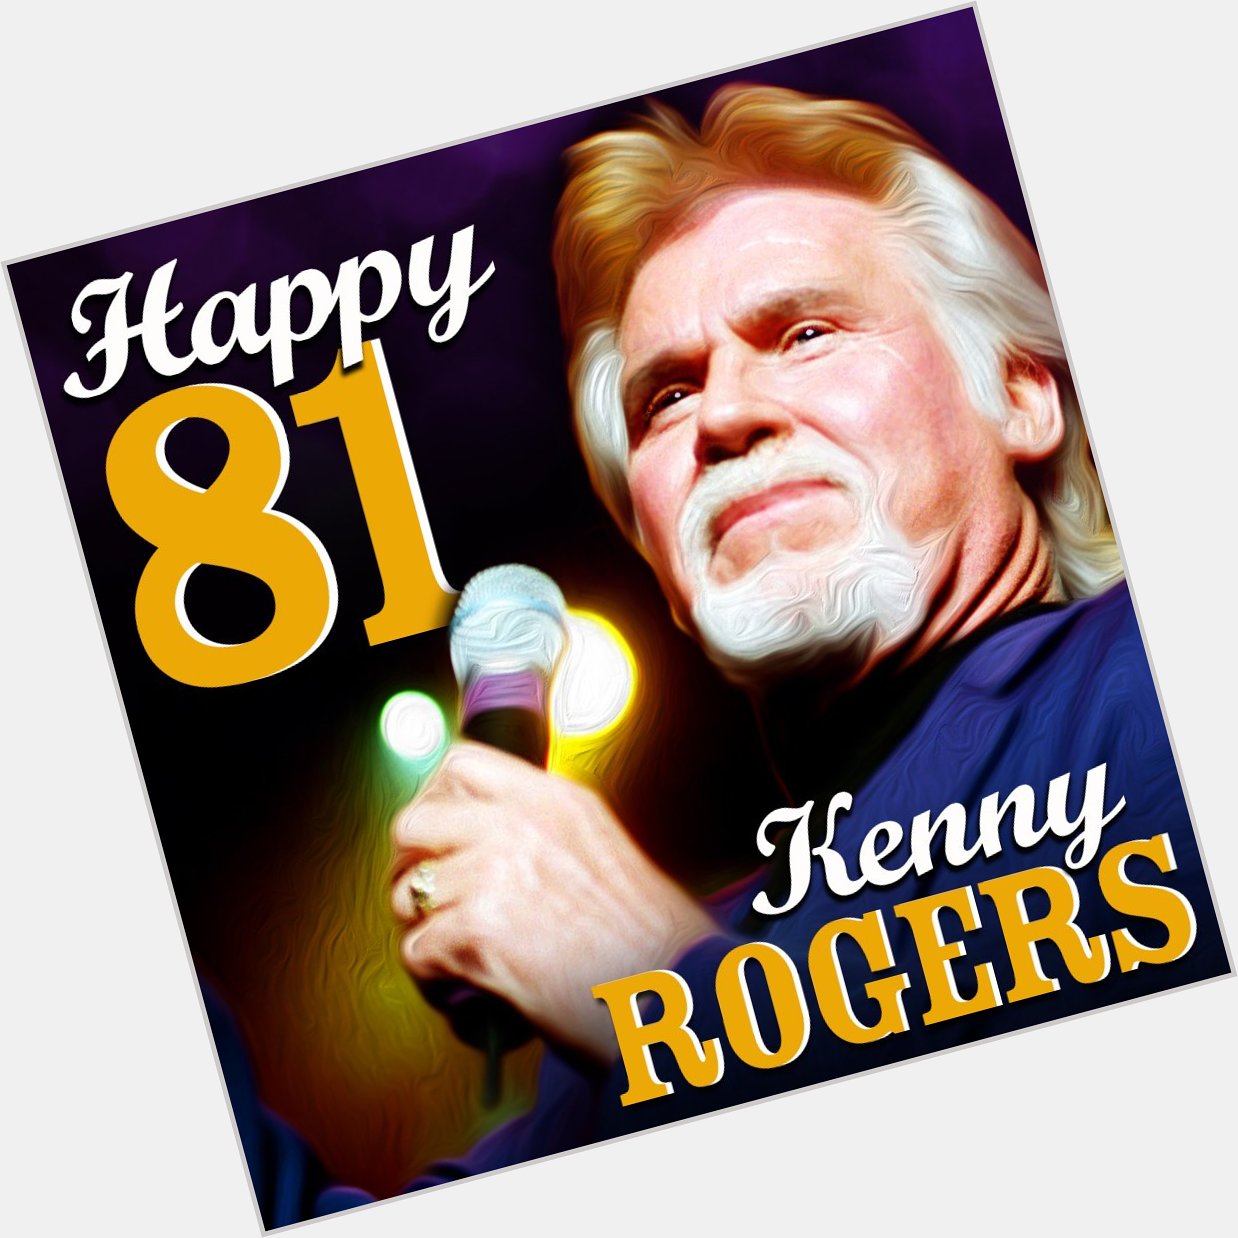 HAPPY BIRTHDAY TO THE GAMBLER! Singer and actor Kenny Rogers turns 81 today.  